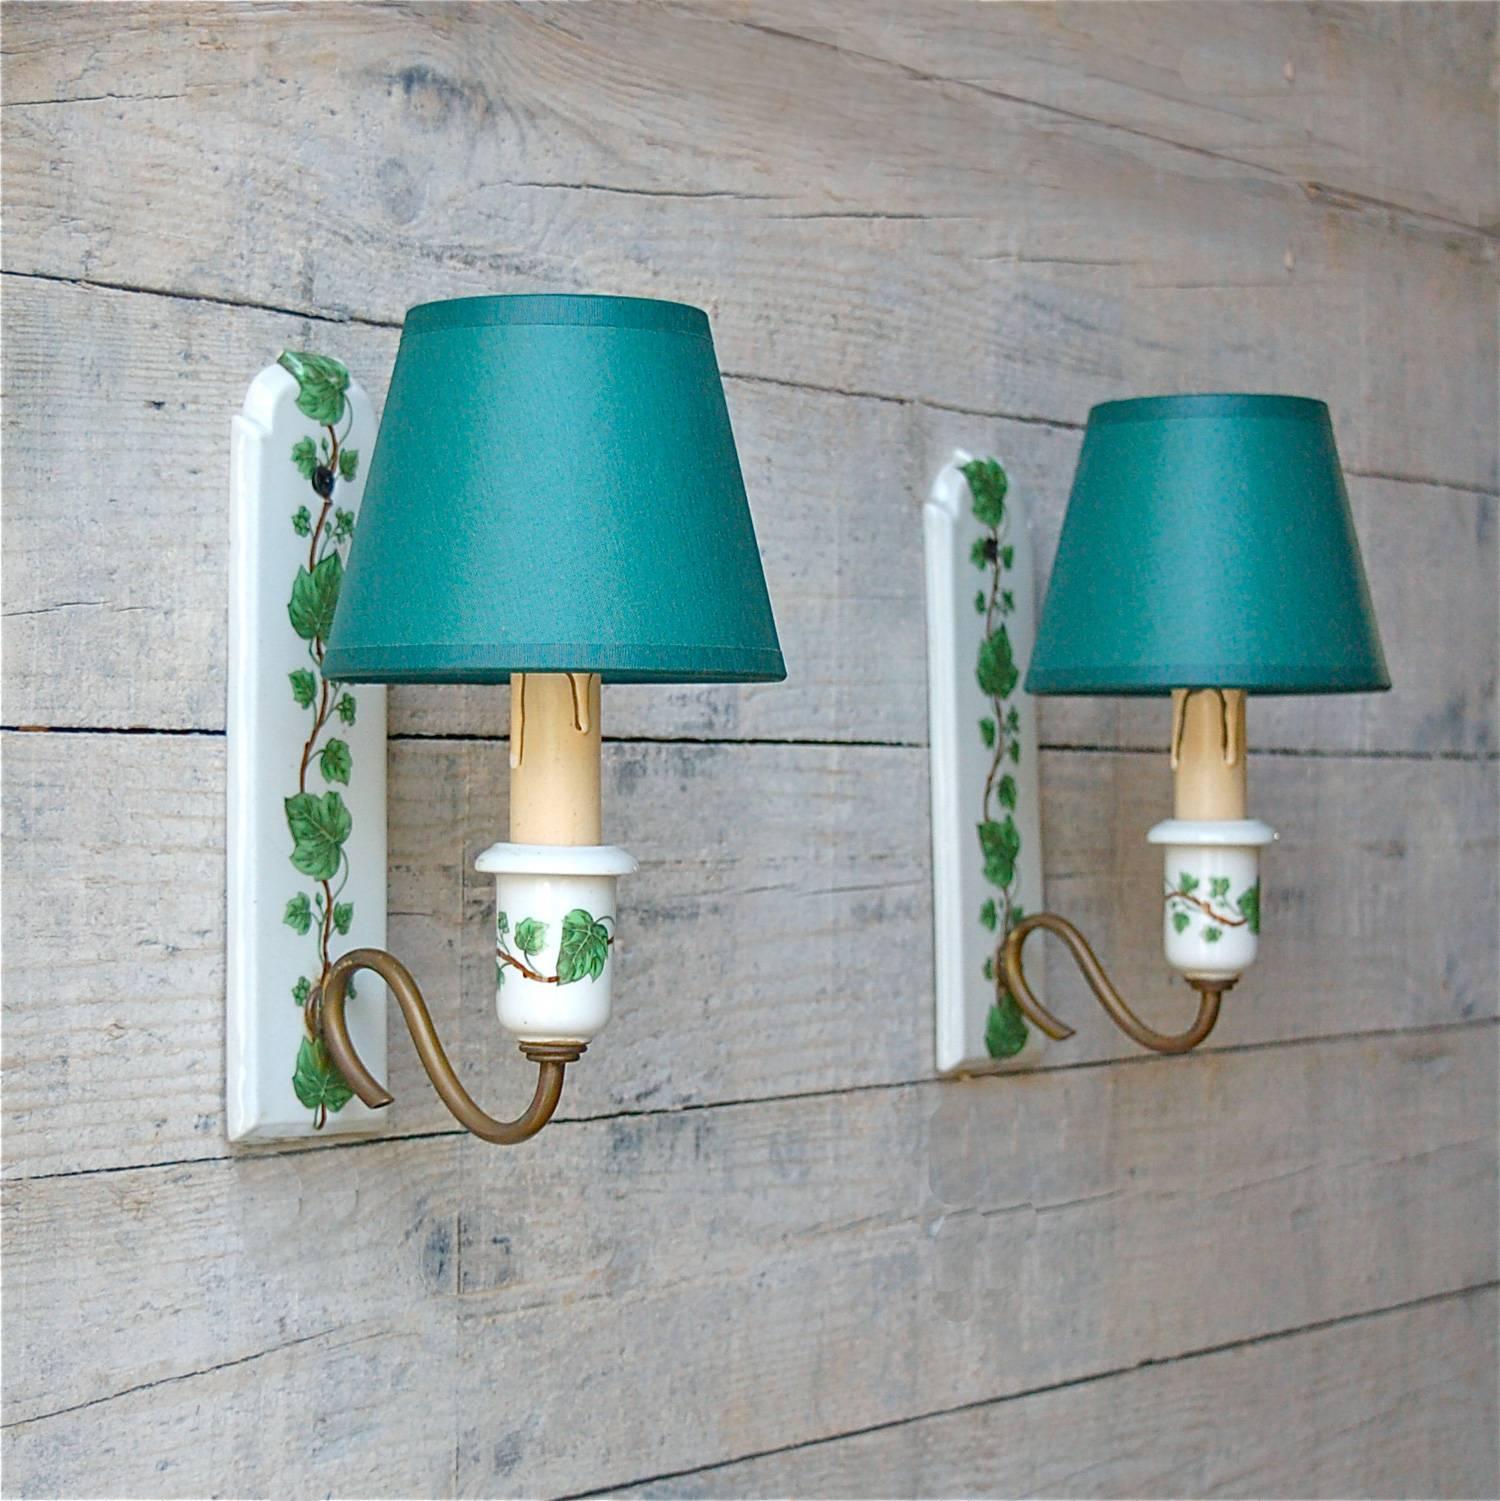 A decorative pair of porcelain candle wall lights with transfer printed decoration of ivy leaves. The green and white wall lights were made in the France in the middle of the 20th century or possibly earlier. The manufacturer also used the motif in